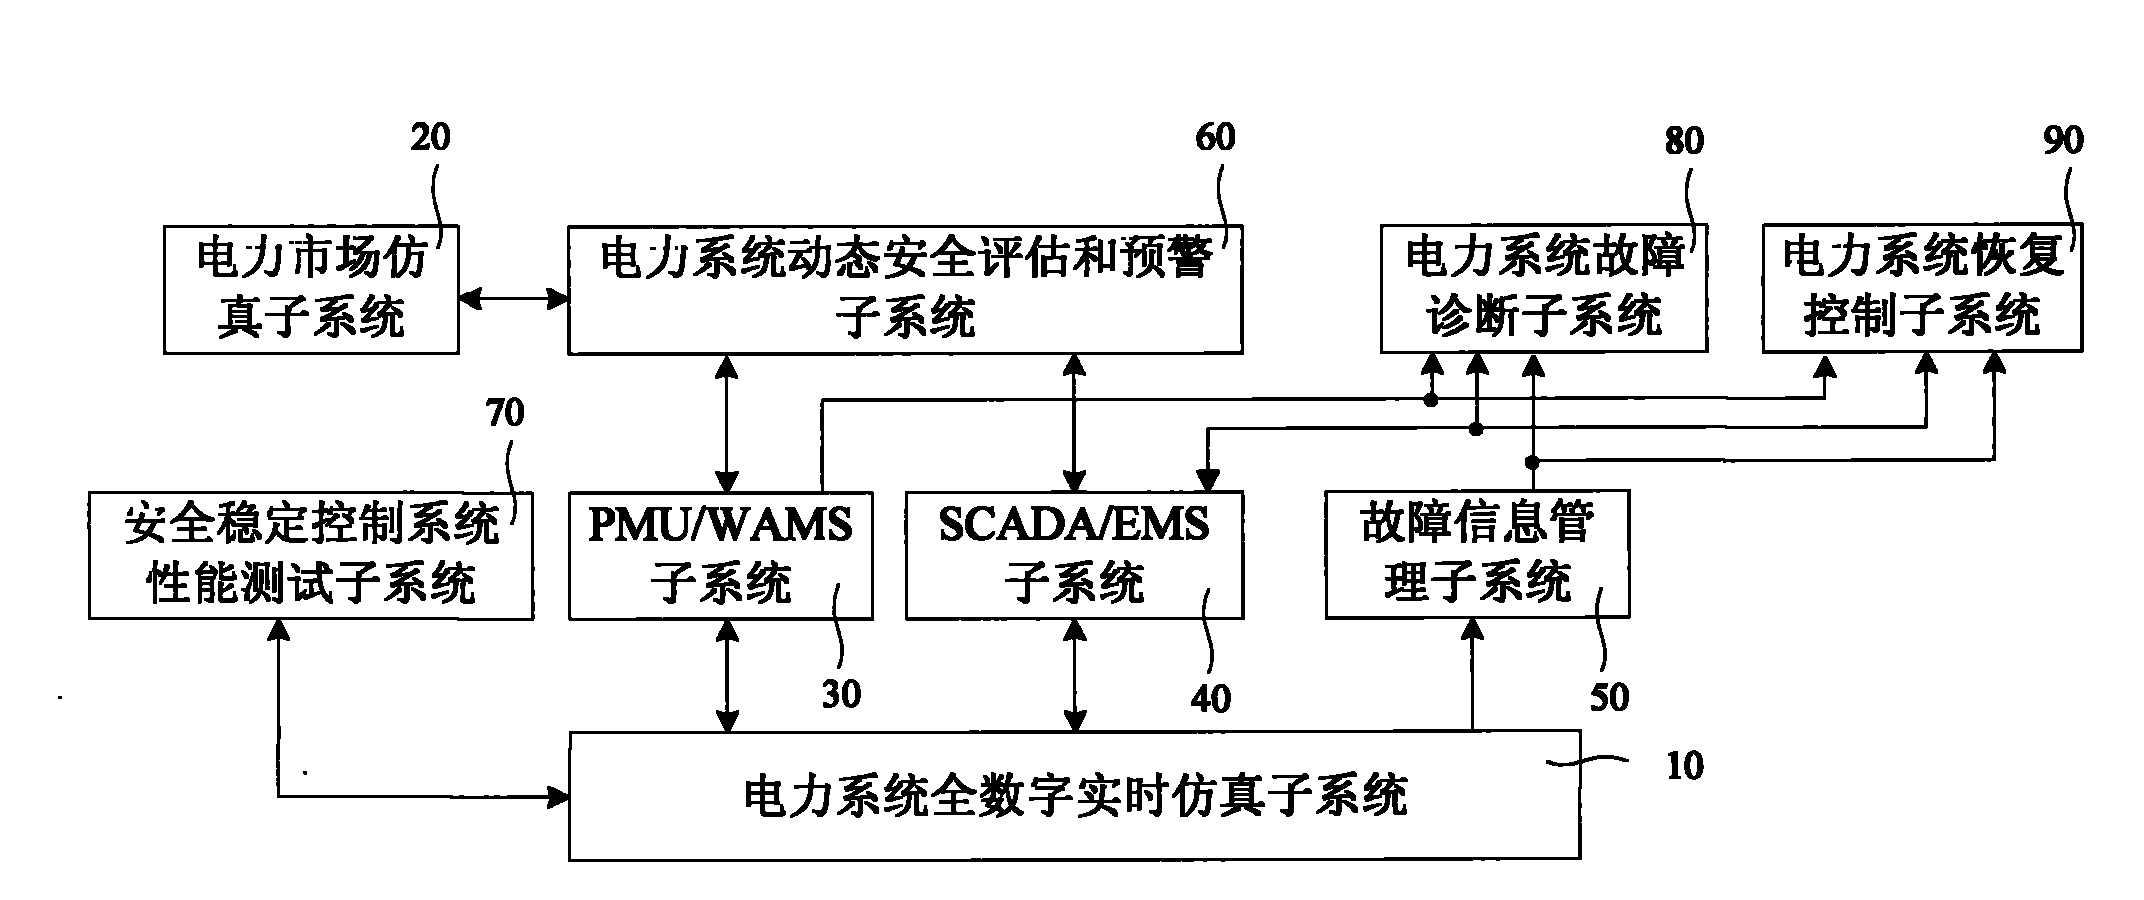 Operation and safety monitoring simulation system for power system